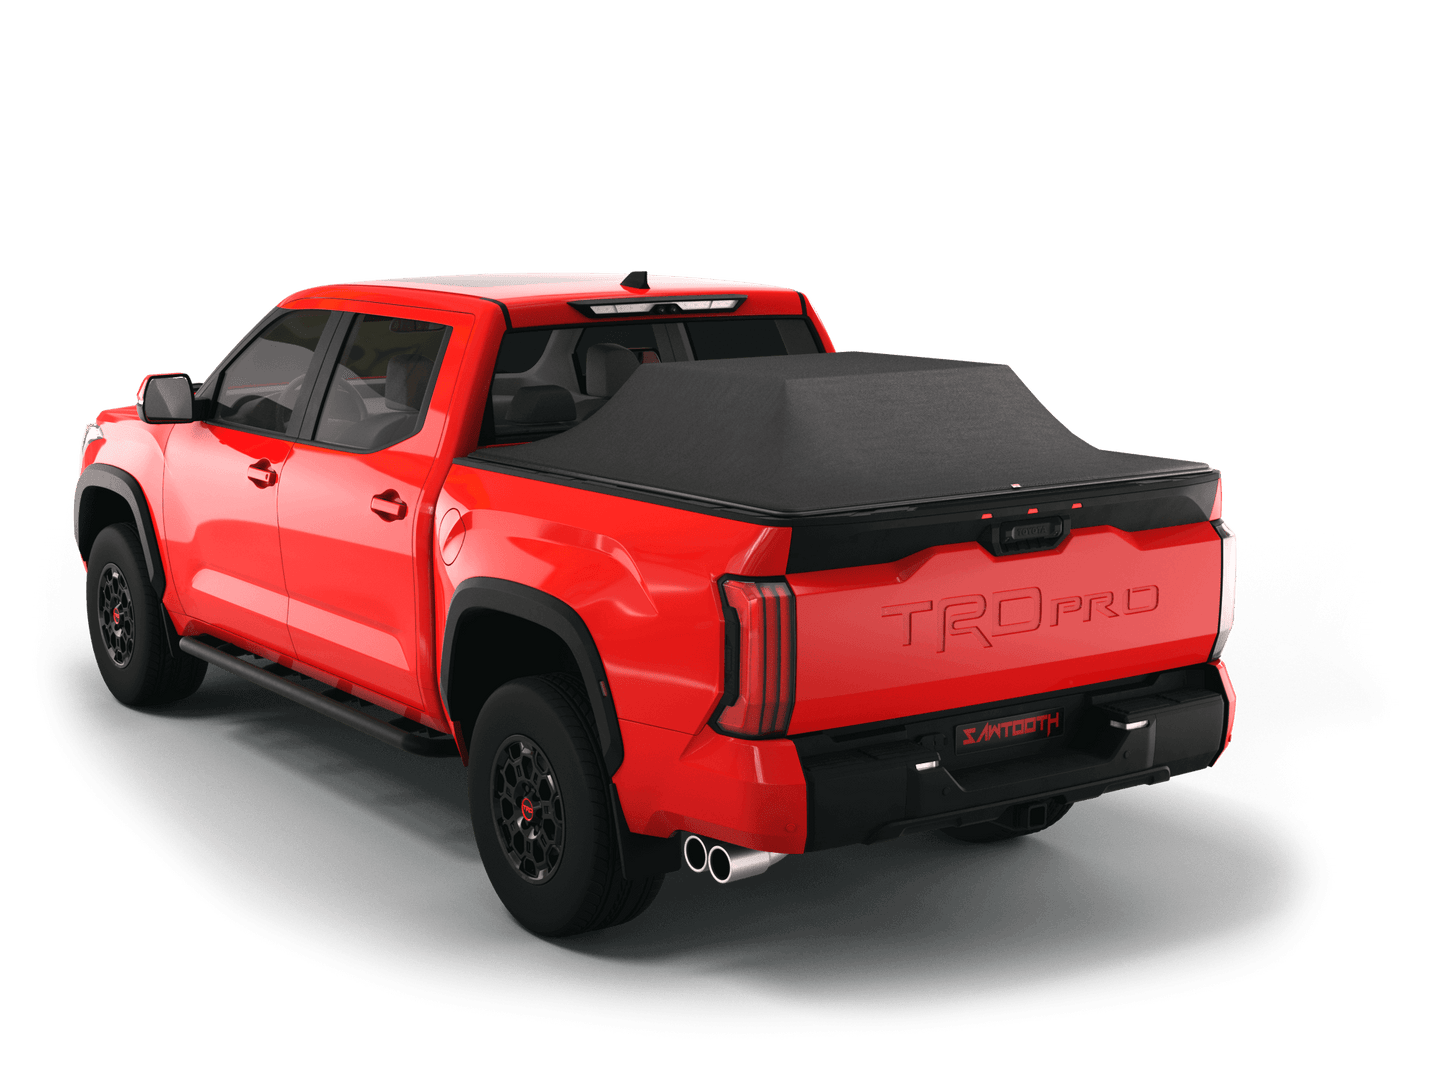 Red Toyota Tundra with gear in the truck bed and the Sawtooth Stretch tonneau cover expanded over cargo load